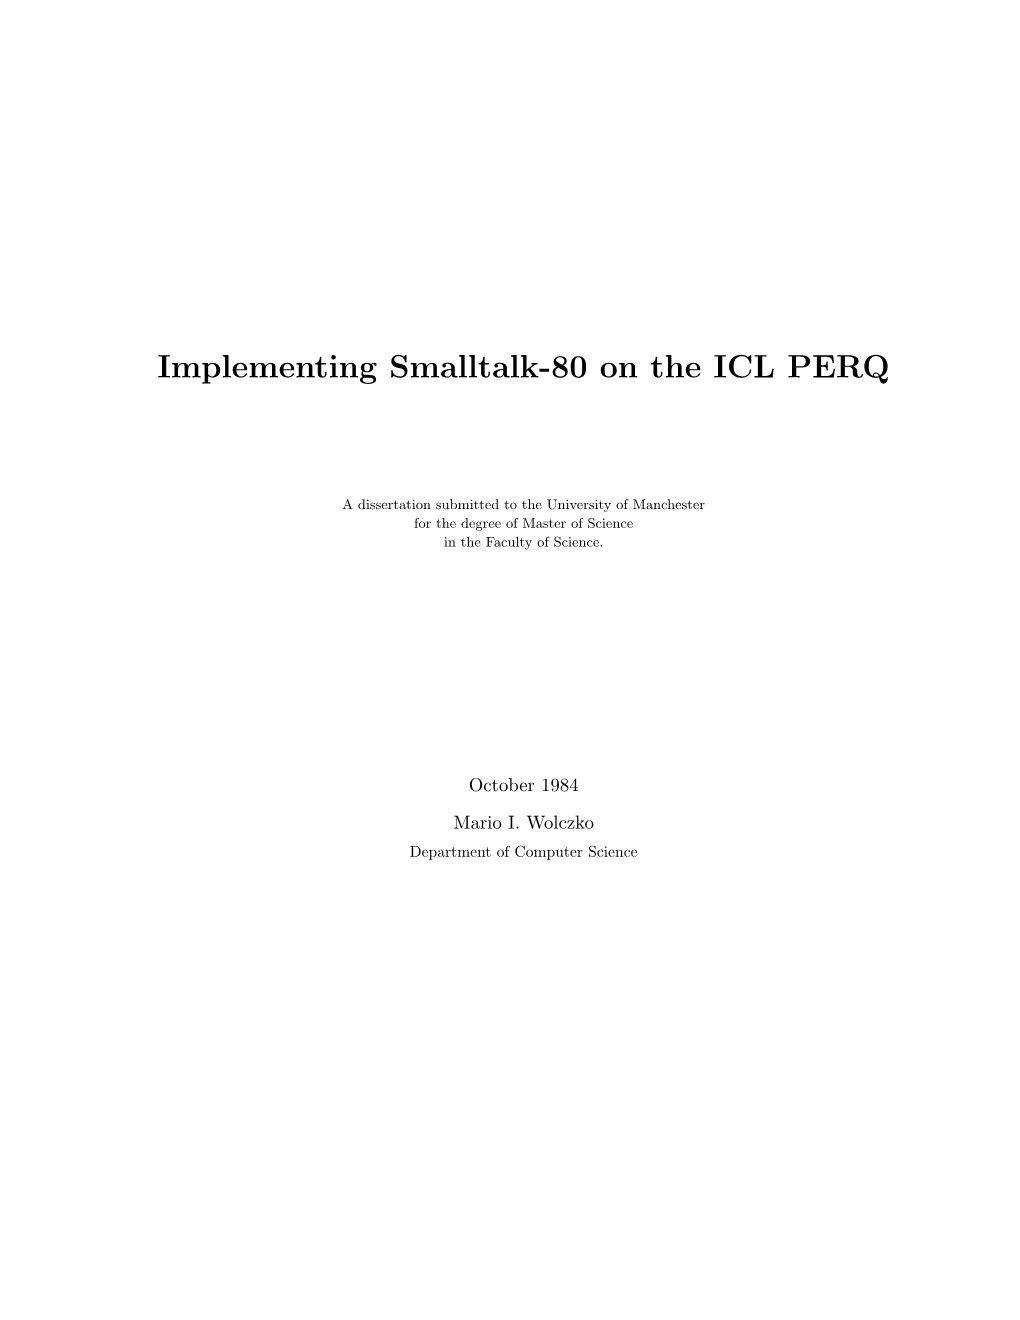 Implementing Smalltalk-80 on the ICL PERQ